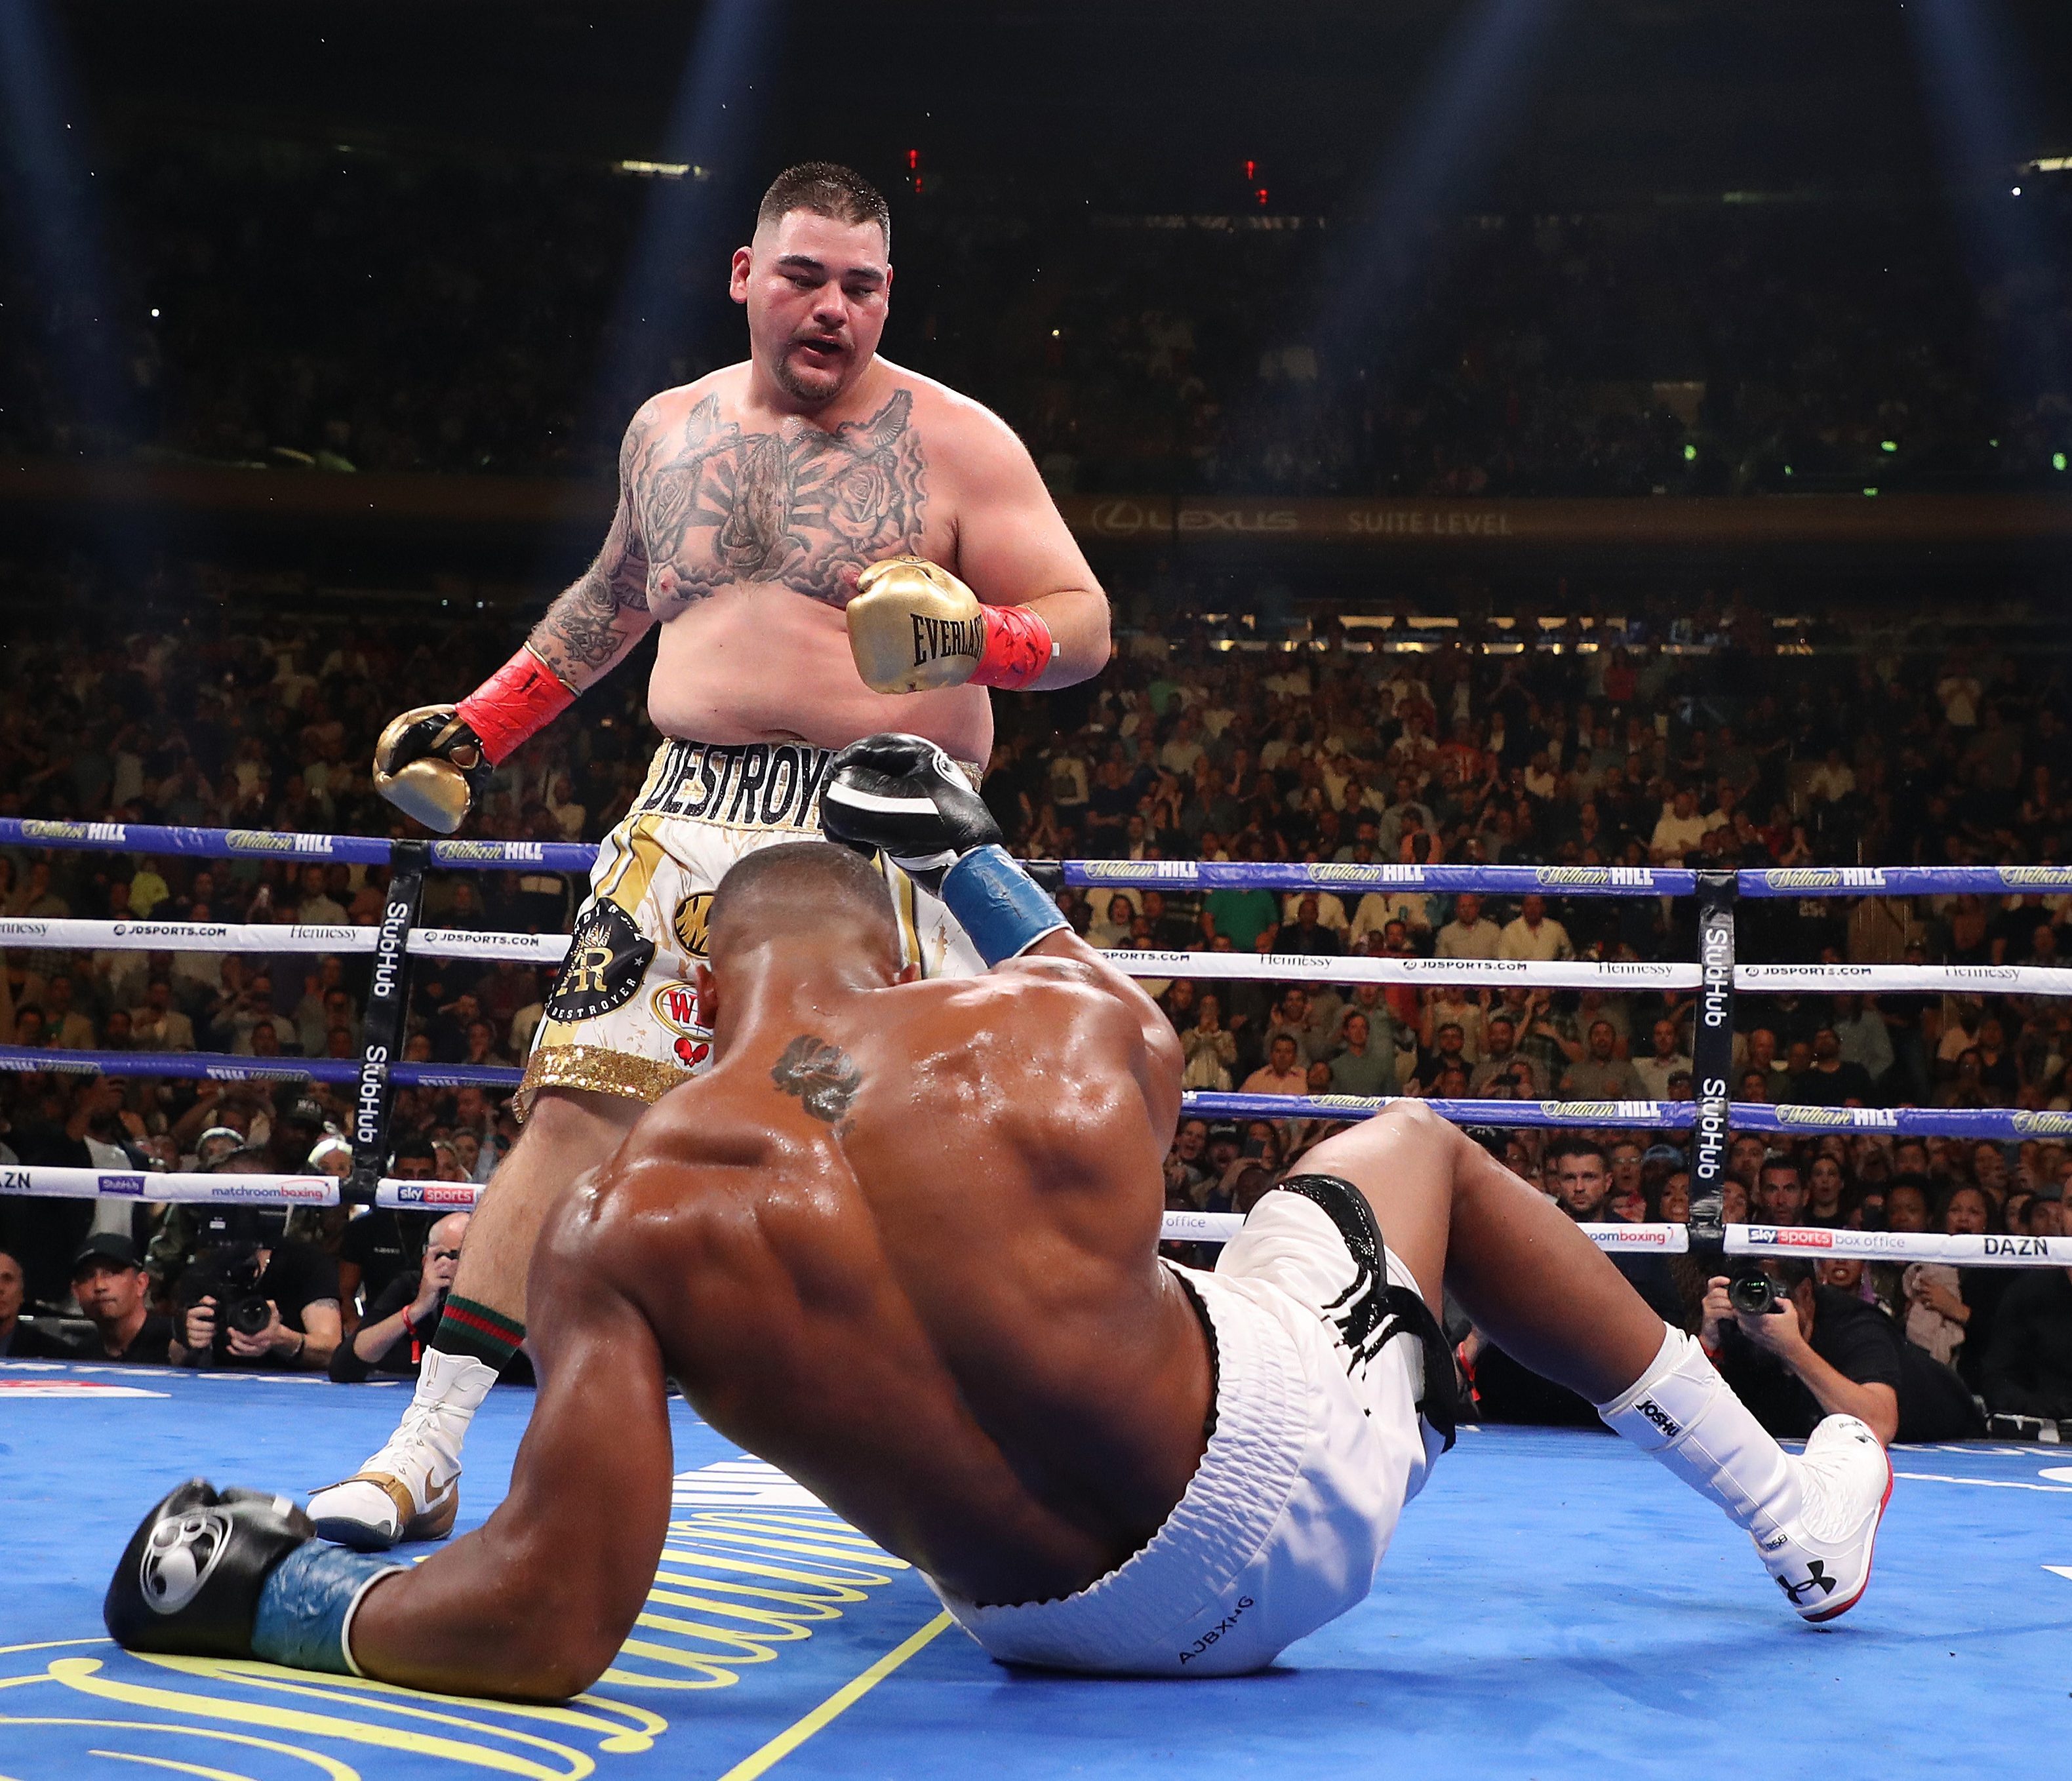 Will it be repeat or revenge for Anthony Joshua against Andy